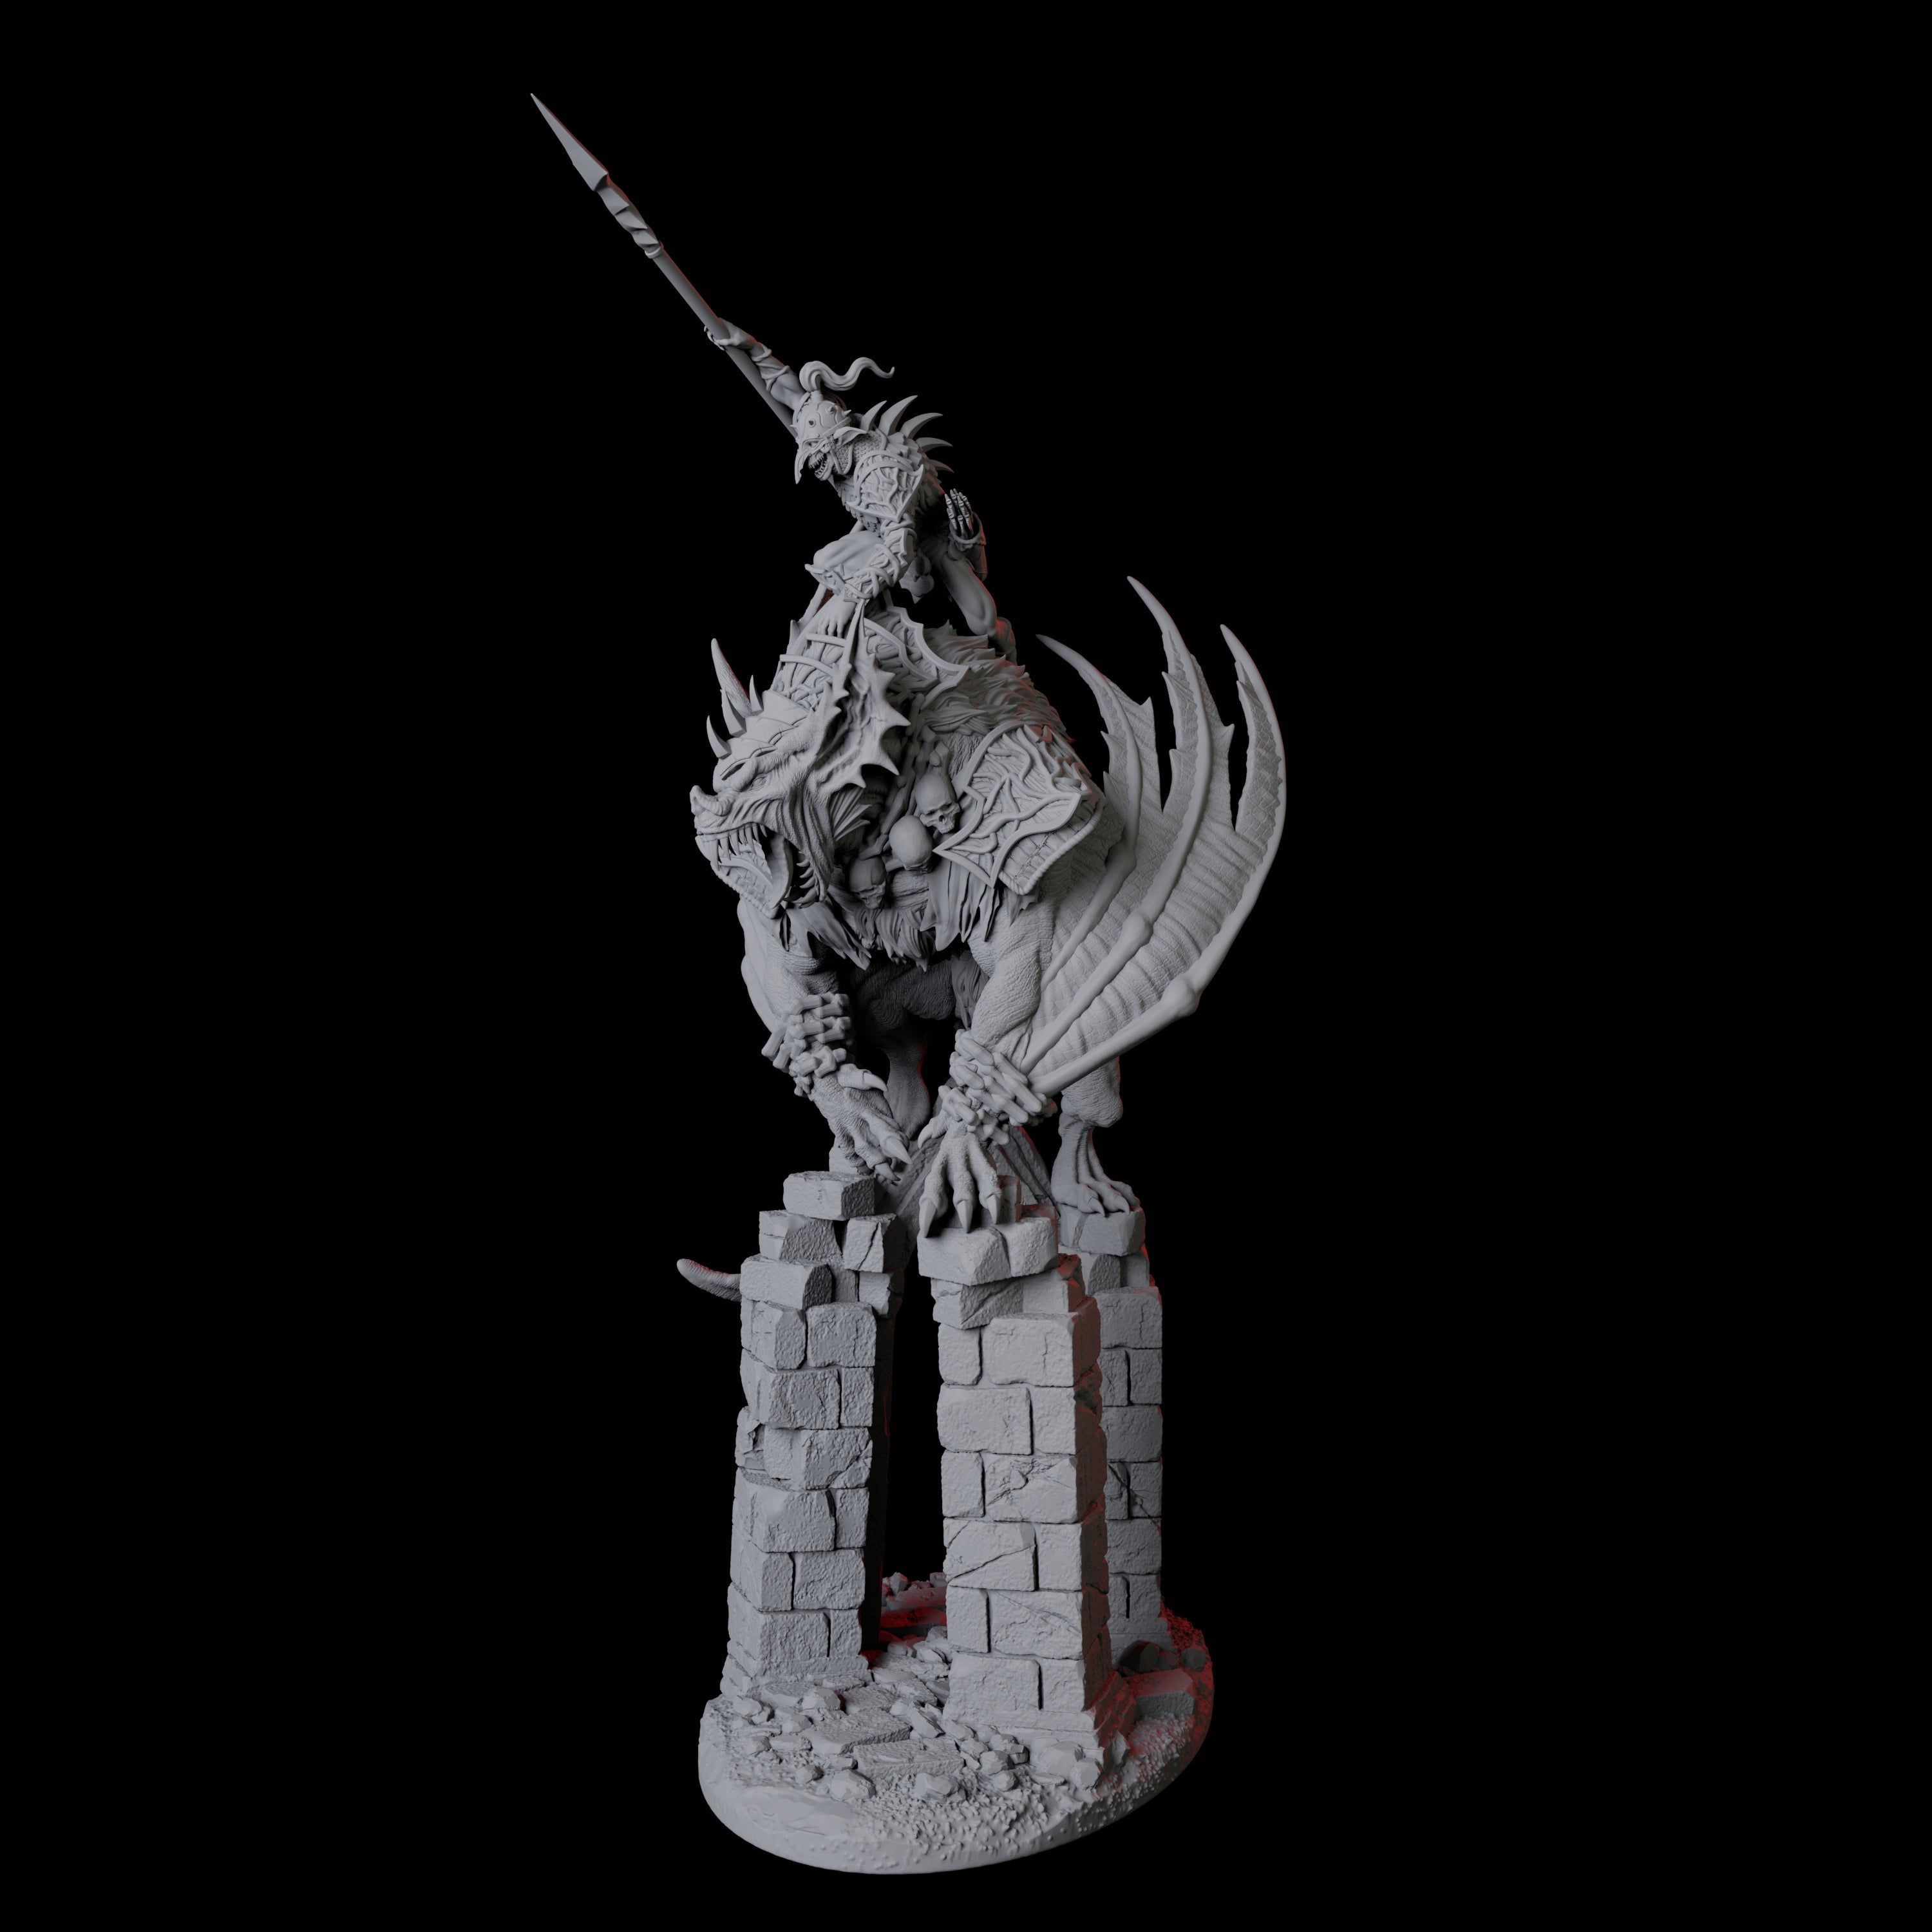 Swooping Vampire Spawn on Giant Bat B Miniature for Dungeons and Dragons, Pathfinder or other TTRPGs